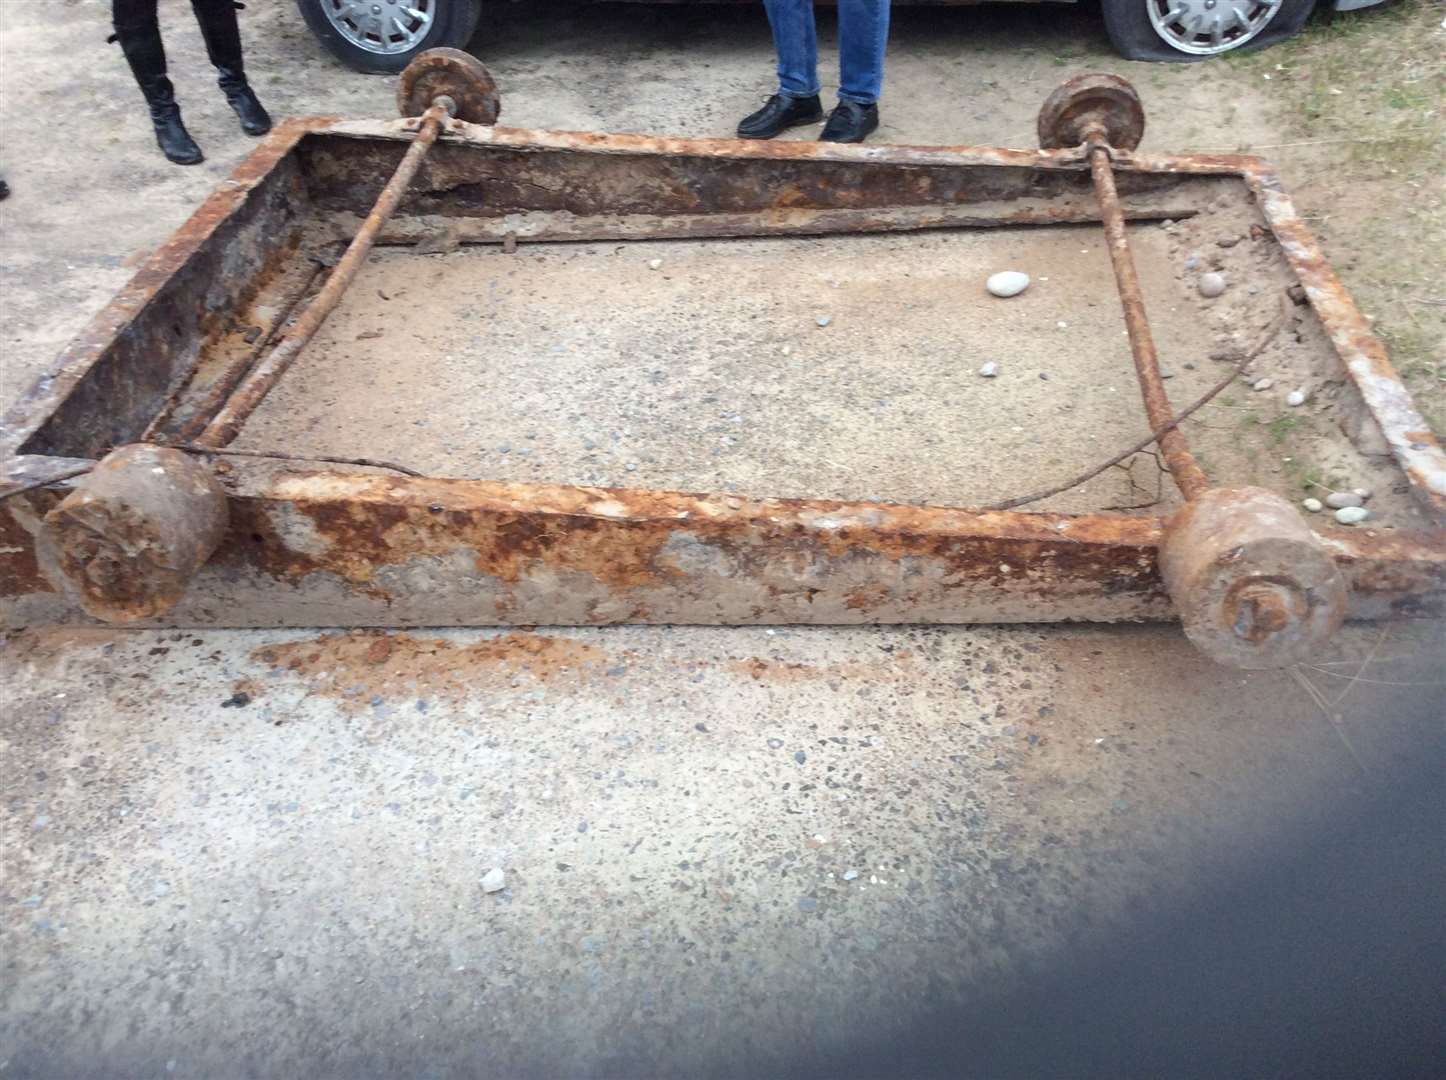 The remains of a cart were unearthed during excavation. It was one of many used by the Royal Engineers during World War 2, to transport sections of pontoons down the beach in Findhorn. The rails for the cart to run on are still visible on the beach along from the Captain’s Table.